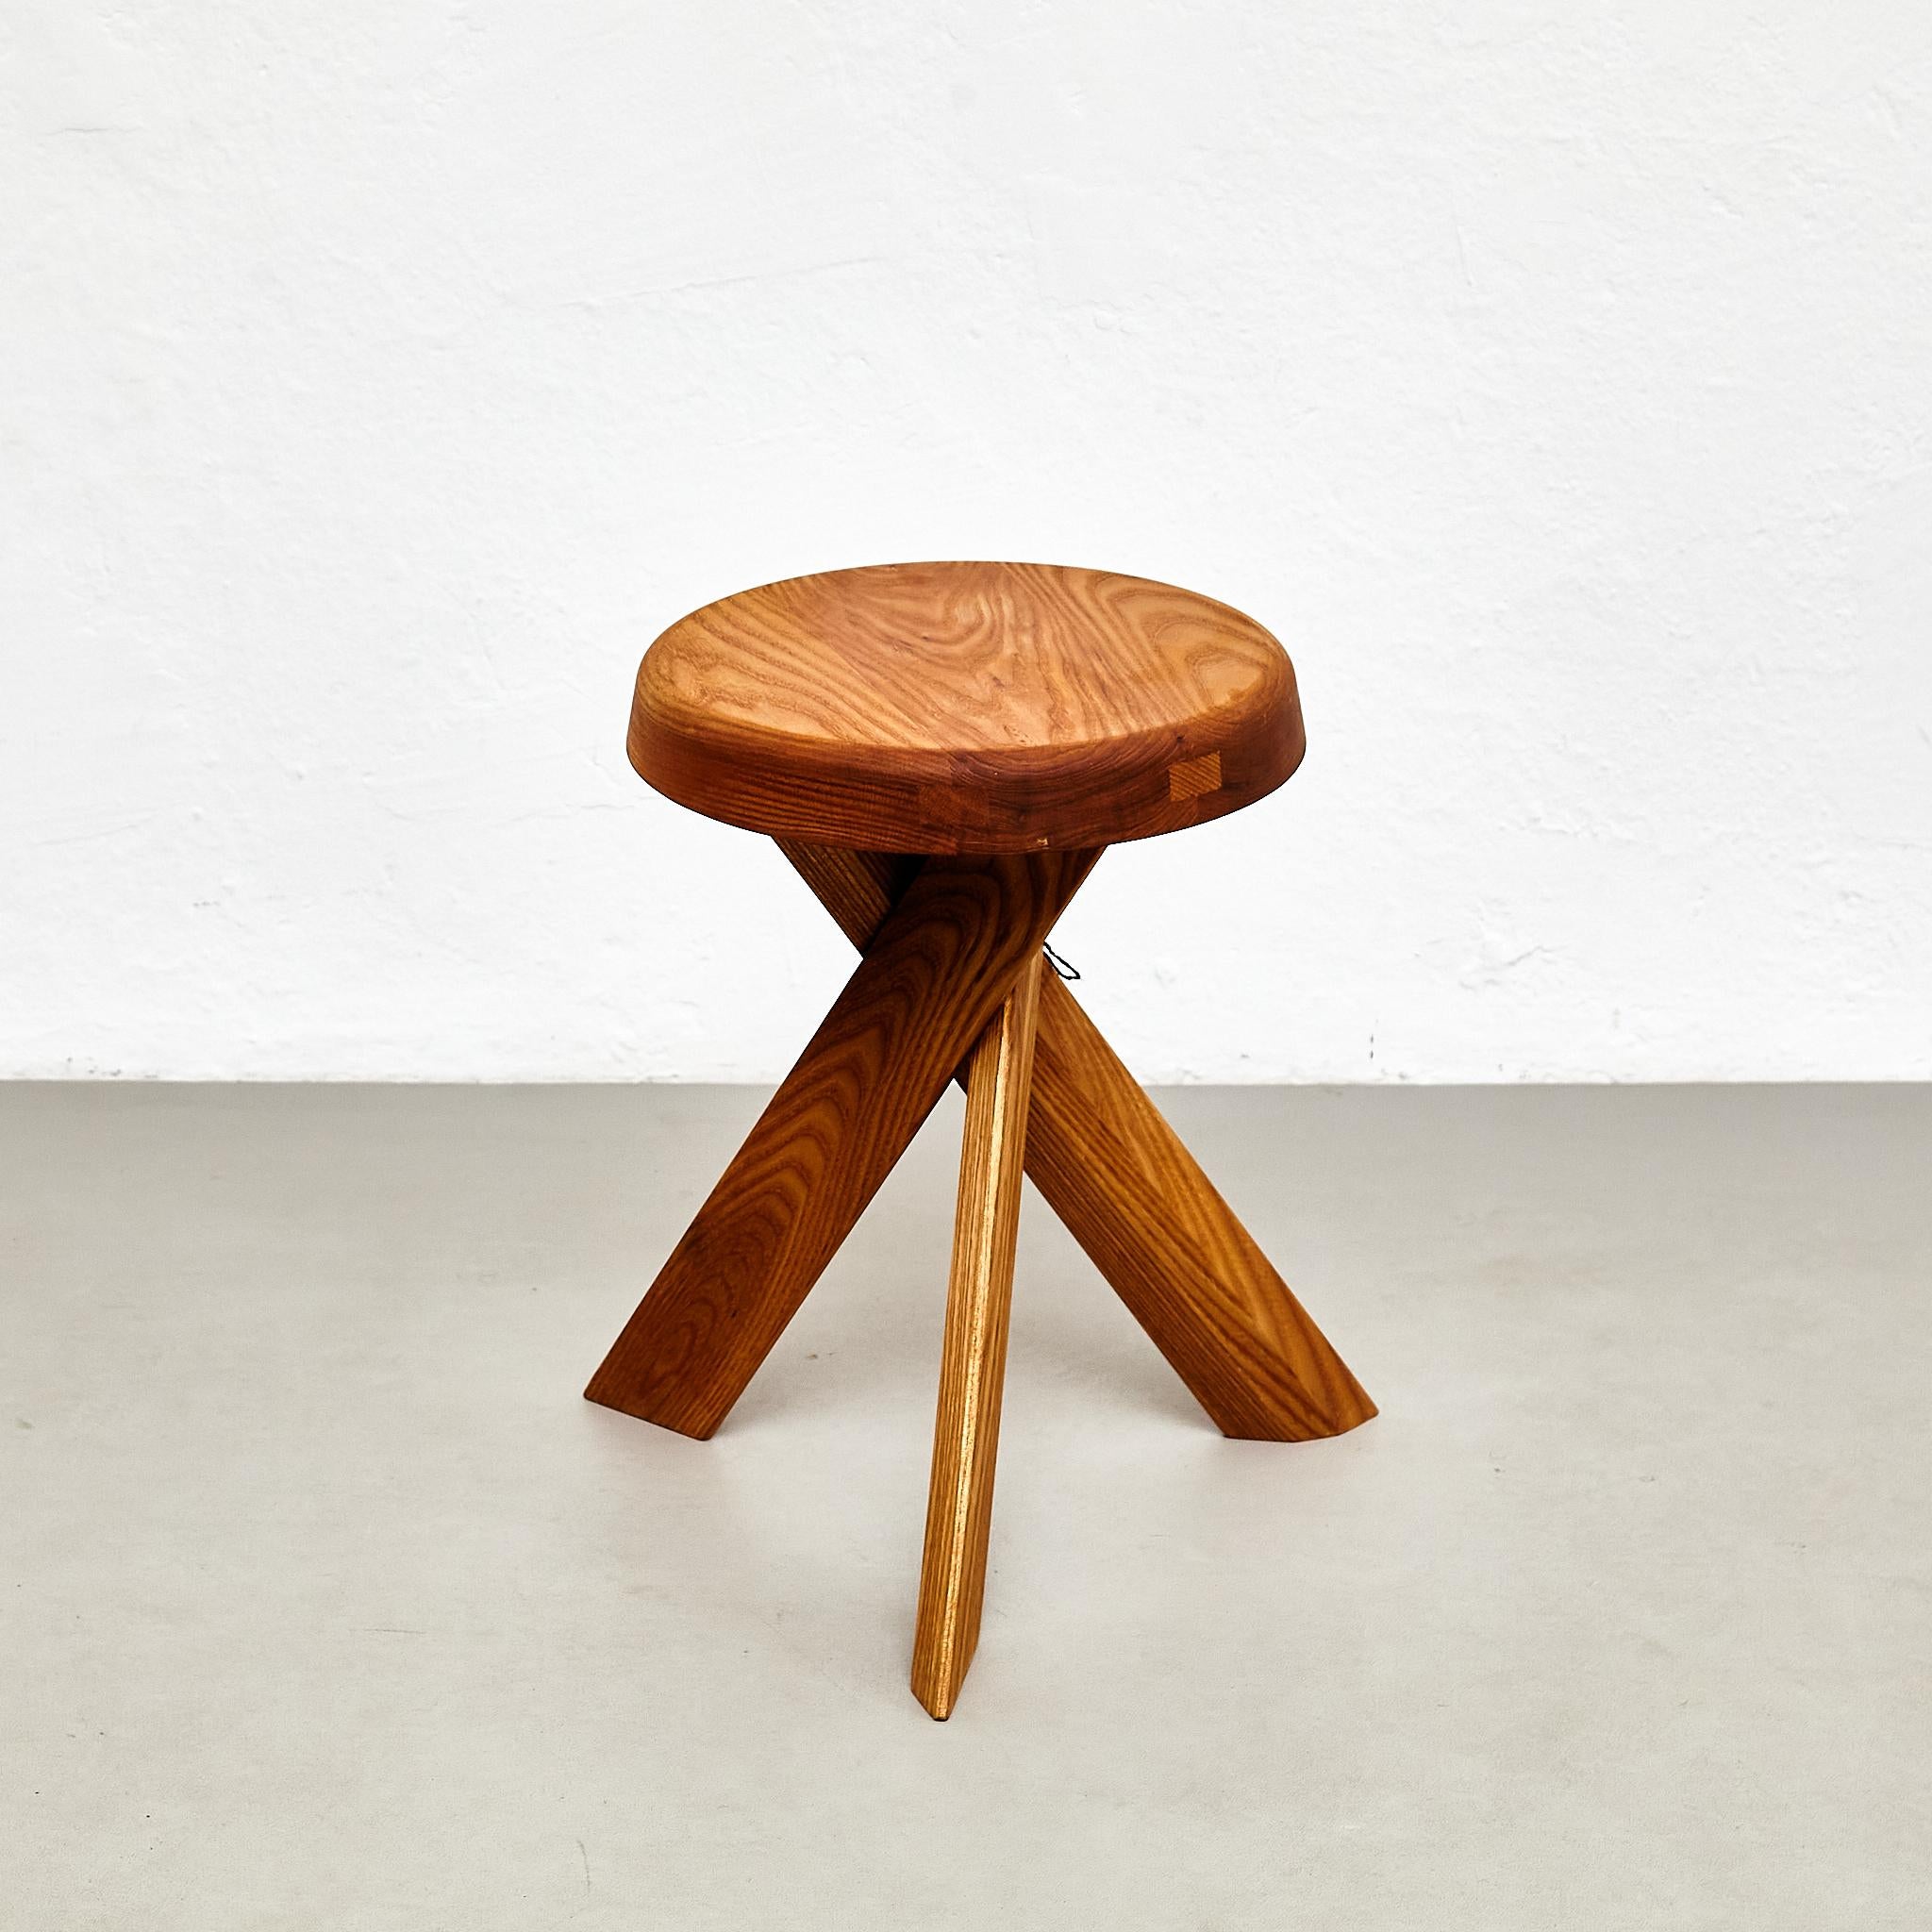 S 31 B stool designed by Pierre Chapo, circa 1960.
Manufactured by Chapo Creation in France, 2021
Stamped solid elmwood.

In good original condition, with minor wear consistent with age and use, preserving a beautiful patina.

Pierre Chapo is born